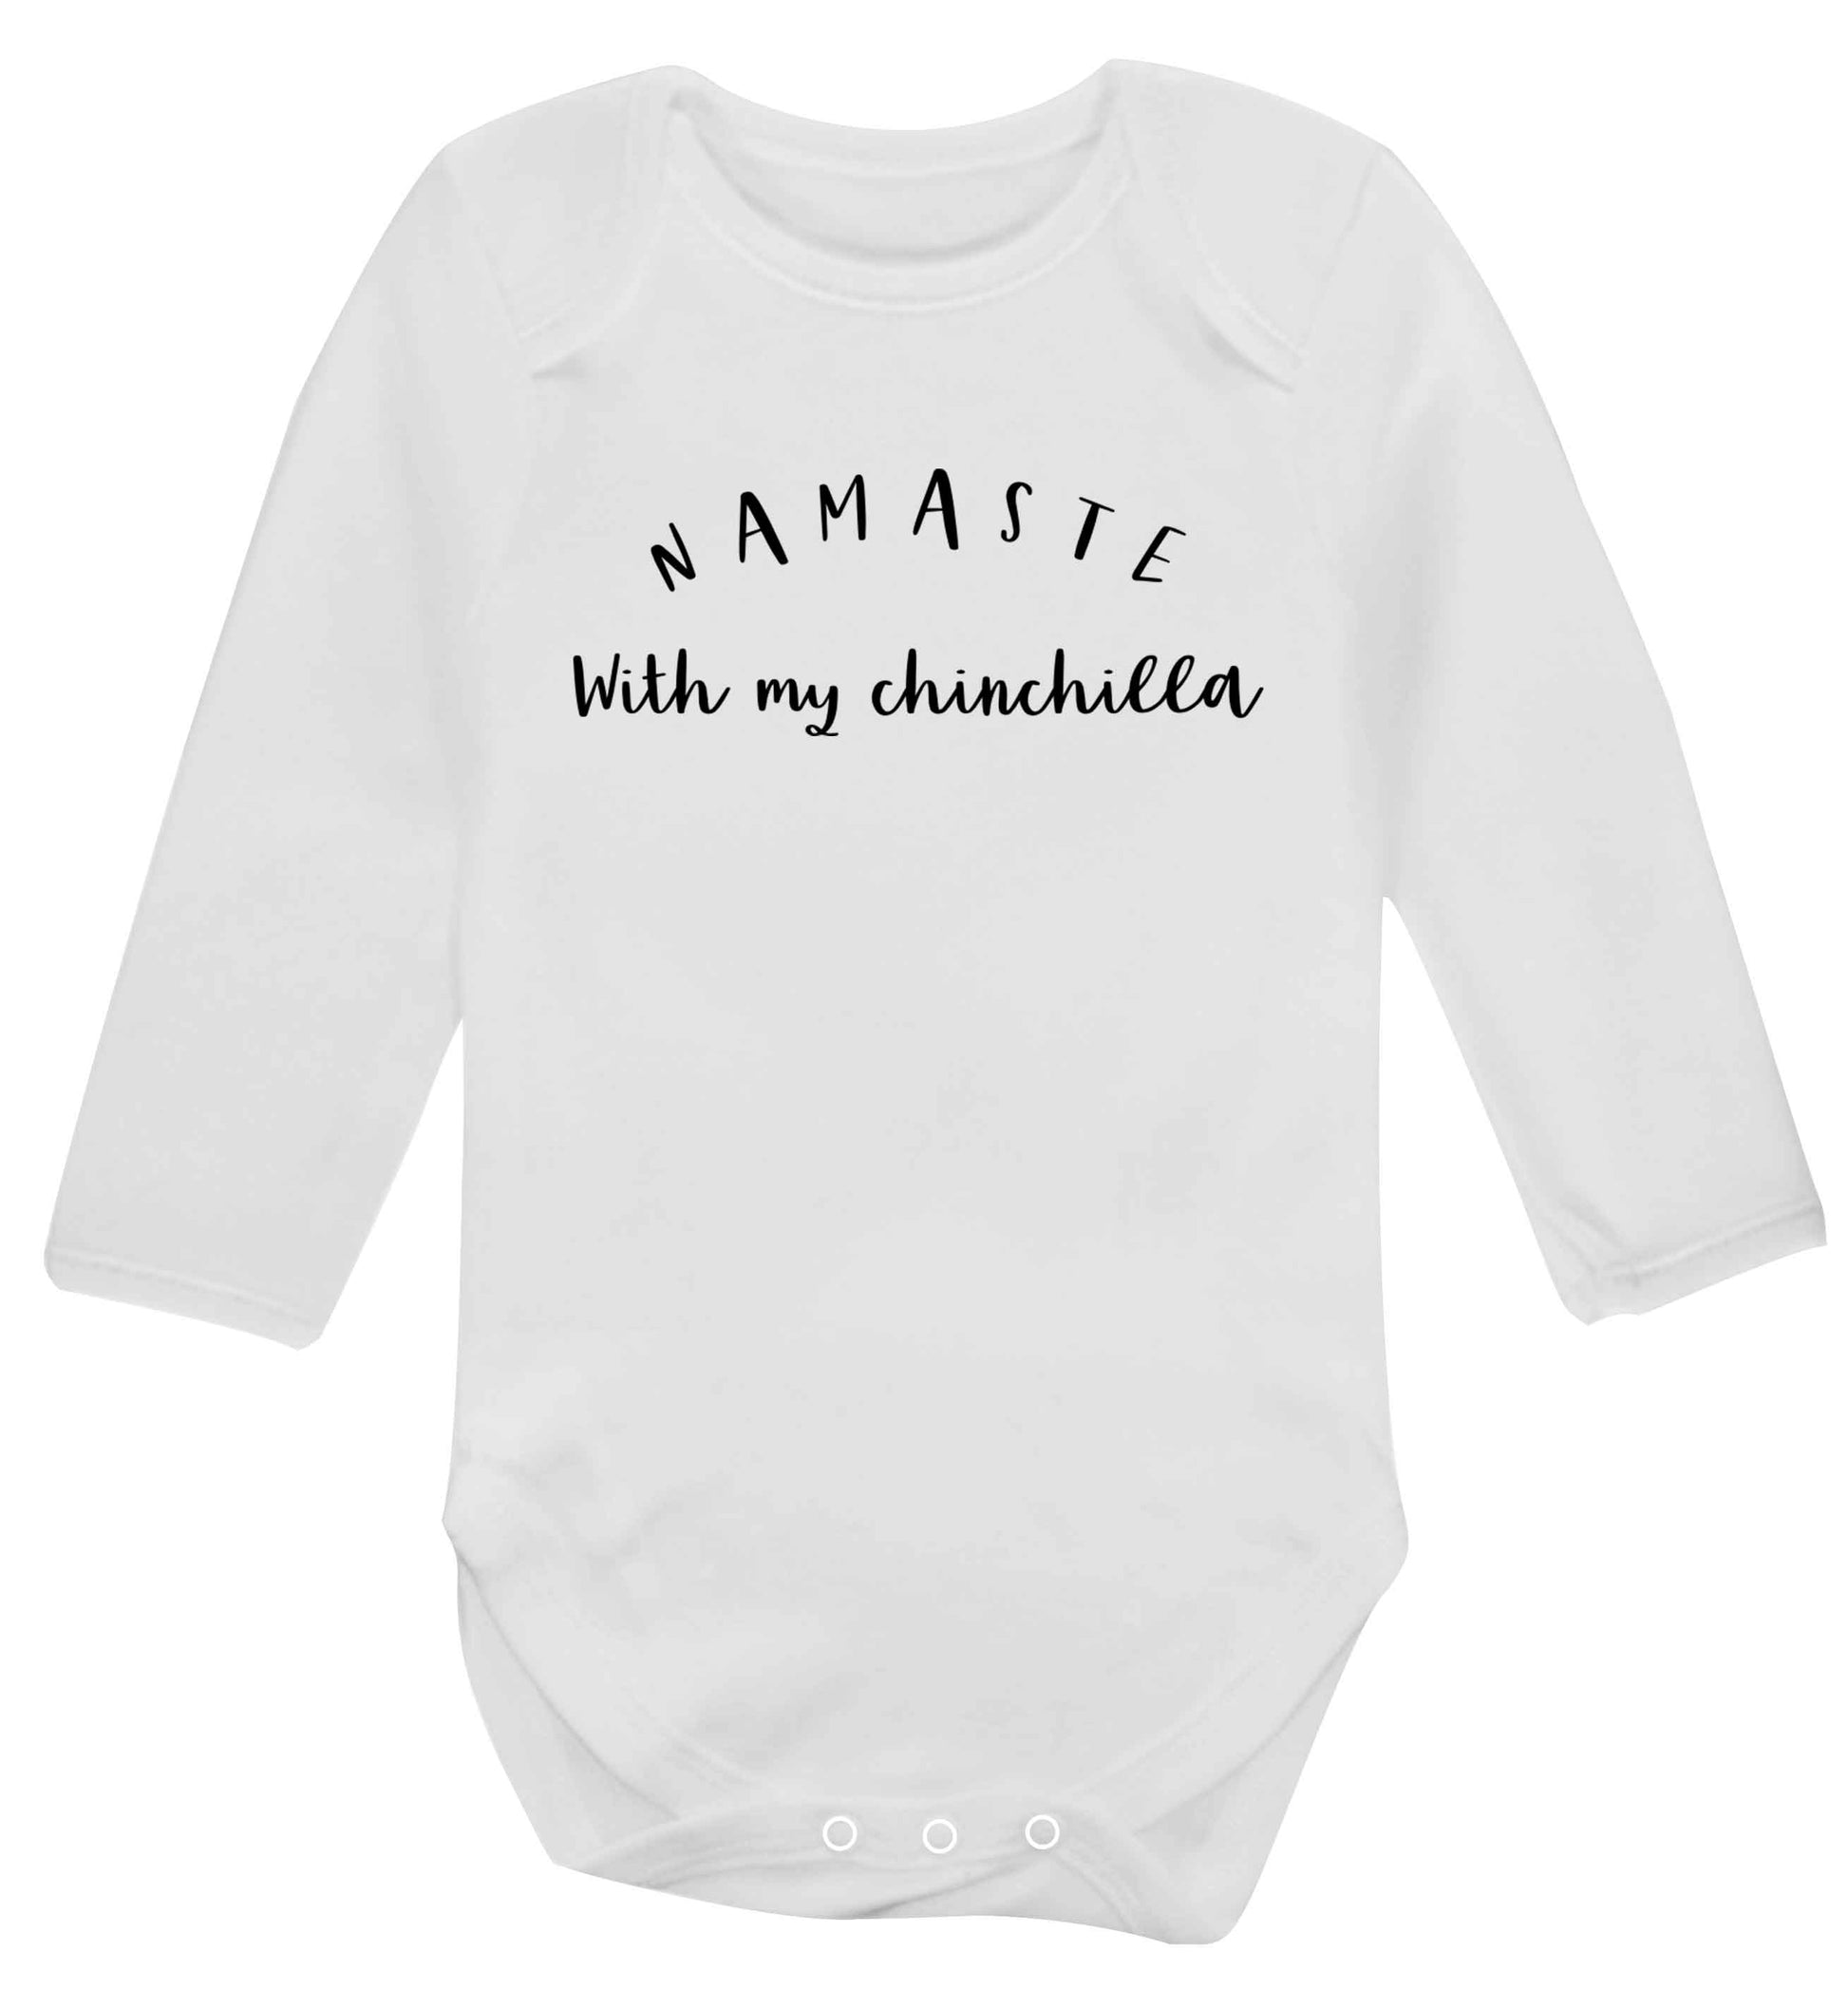 Namaste with my chinchilla Baby Vest long sleeved white 6-12 months